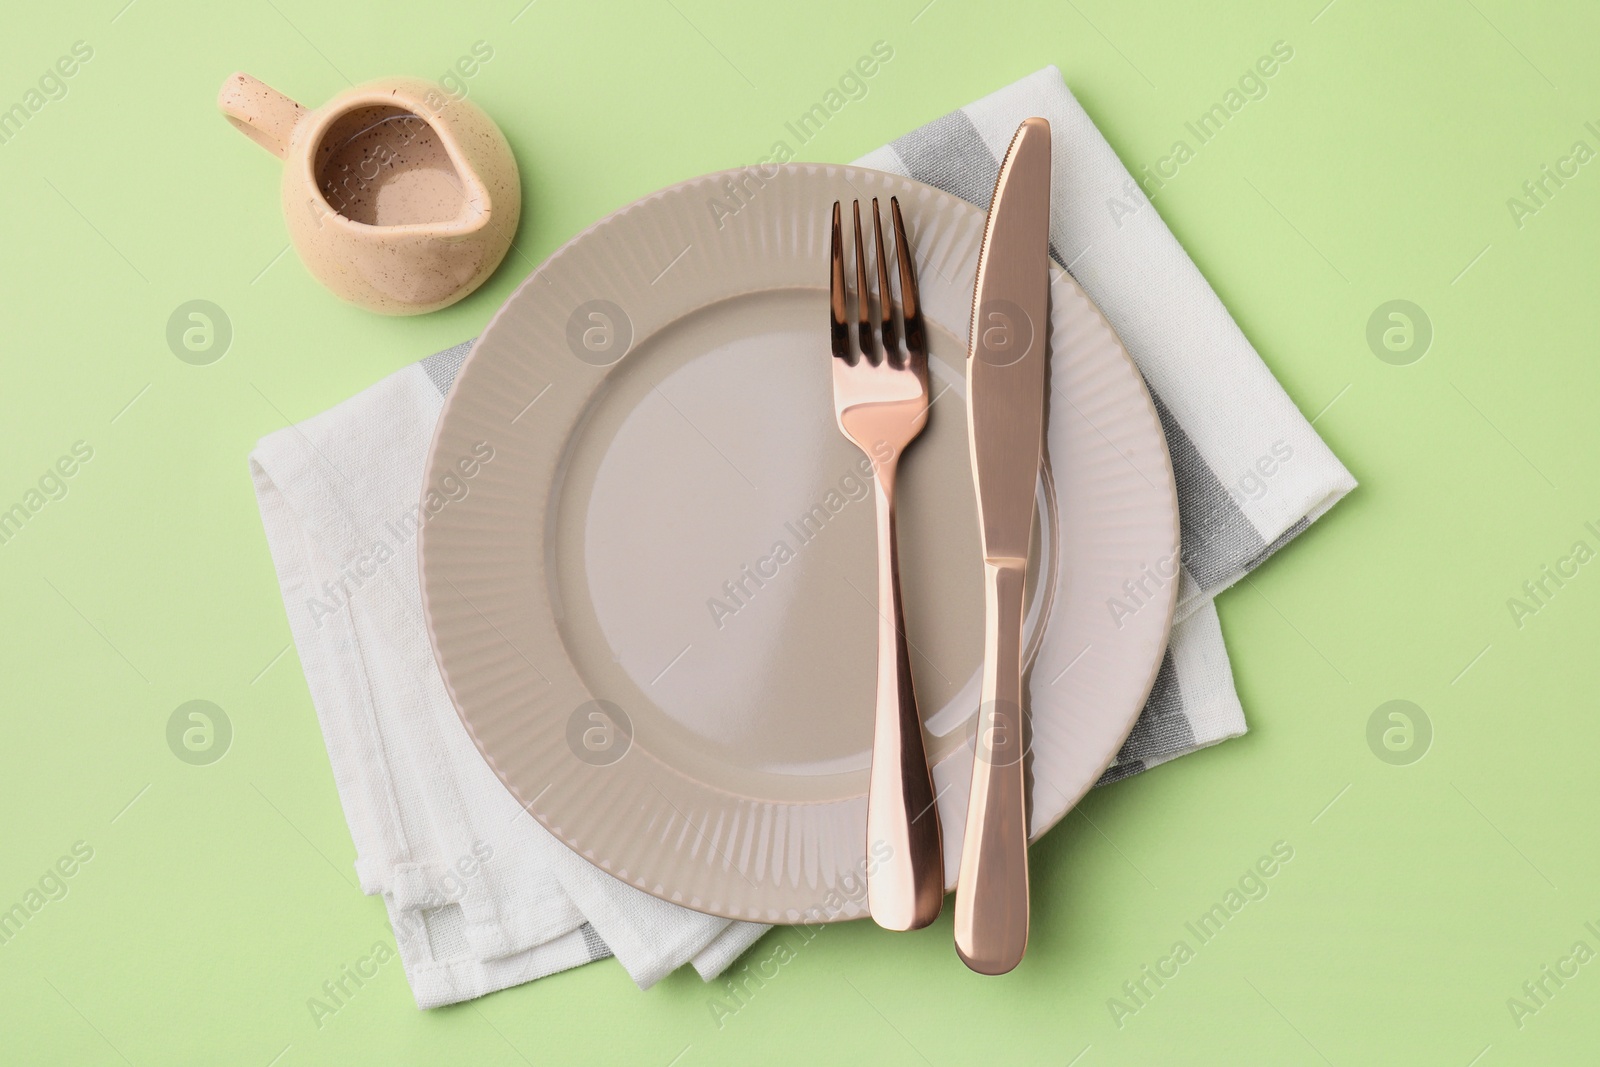 Photo of Clean plate with cutlery, saucepan and napkin on light green background, flat lay